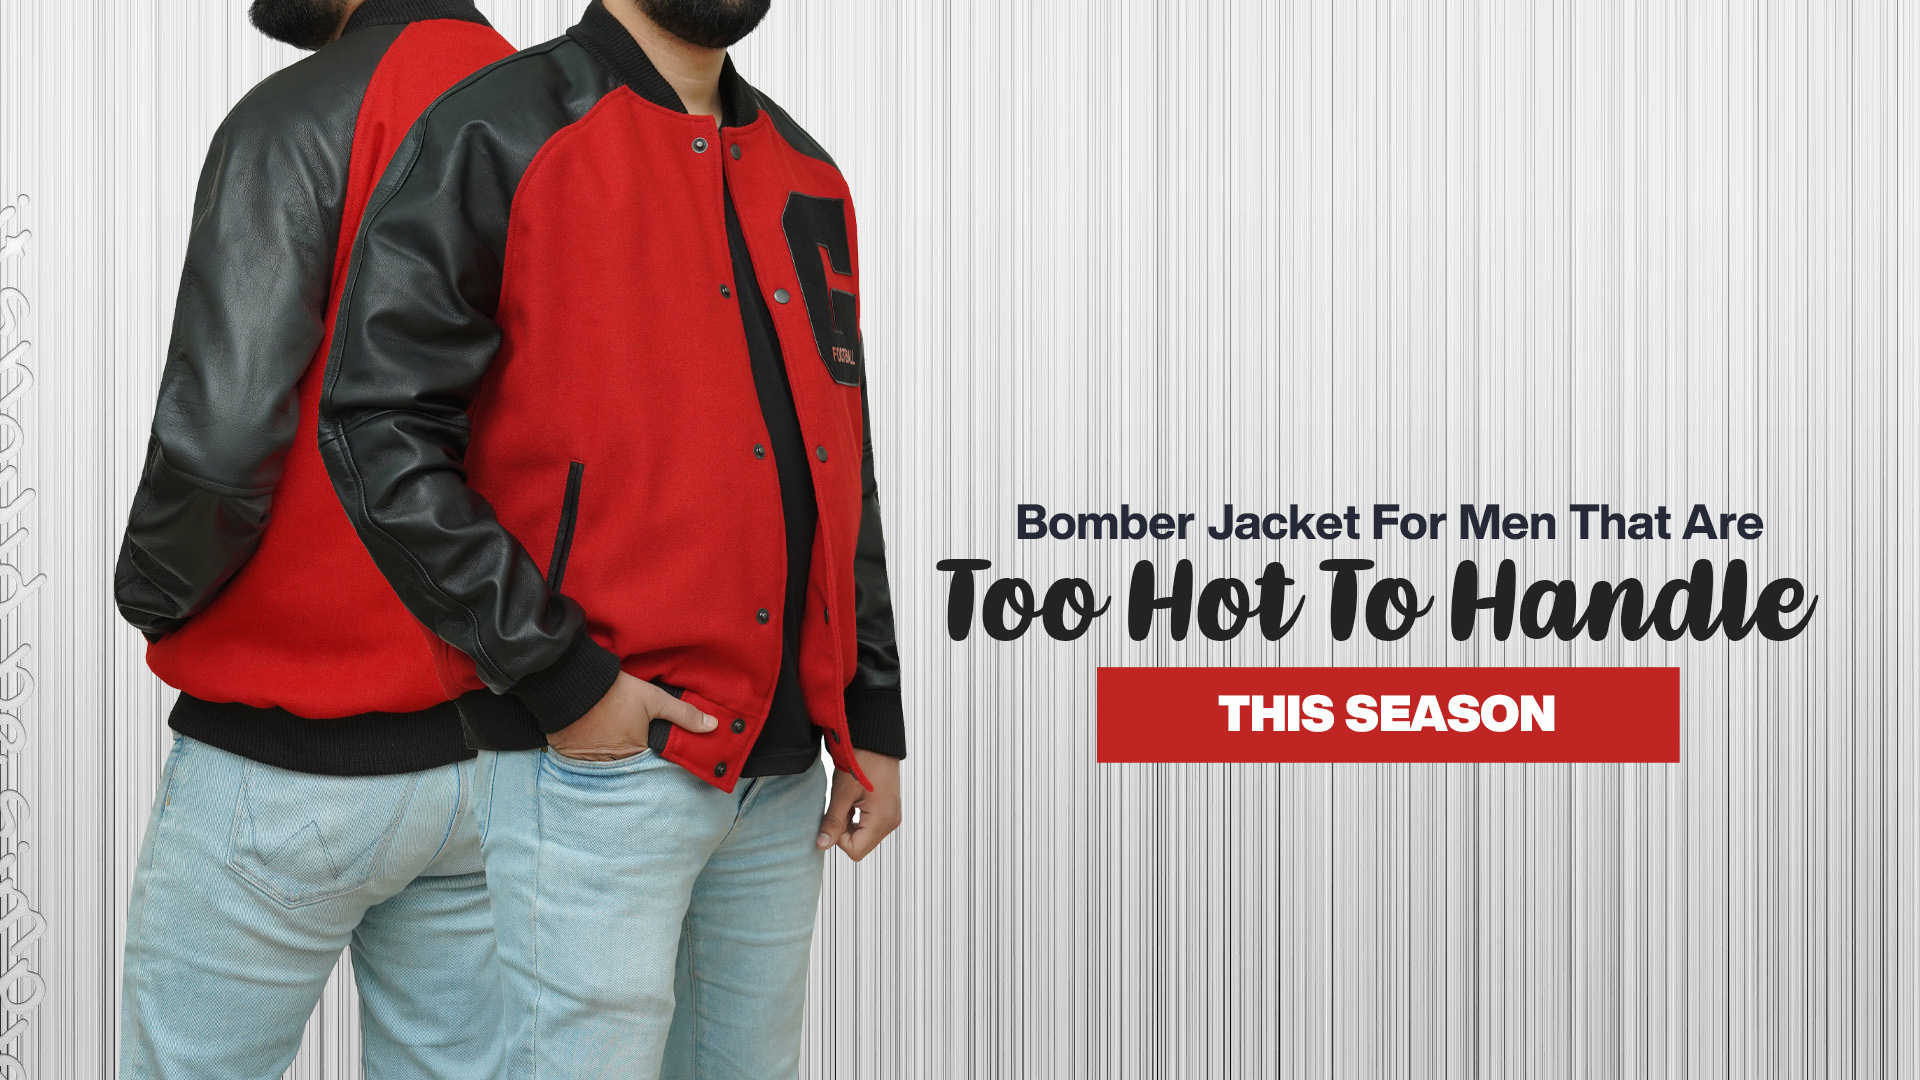 Bomber Jacket For Men That Are Too Hot To Handle This Season